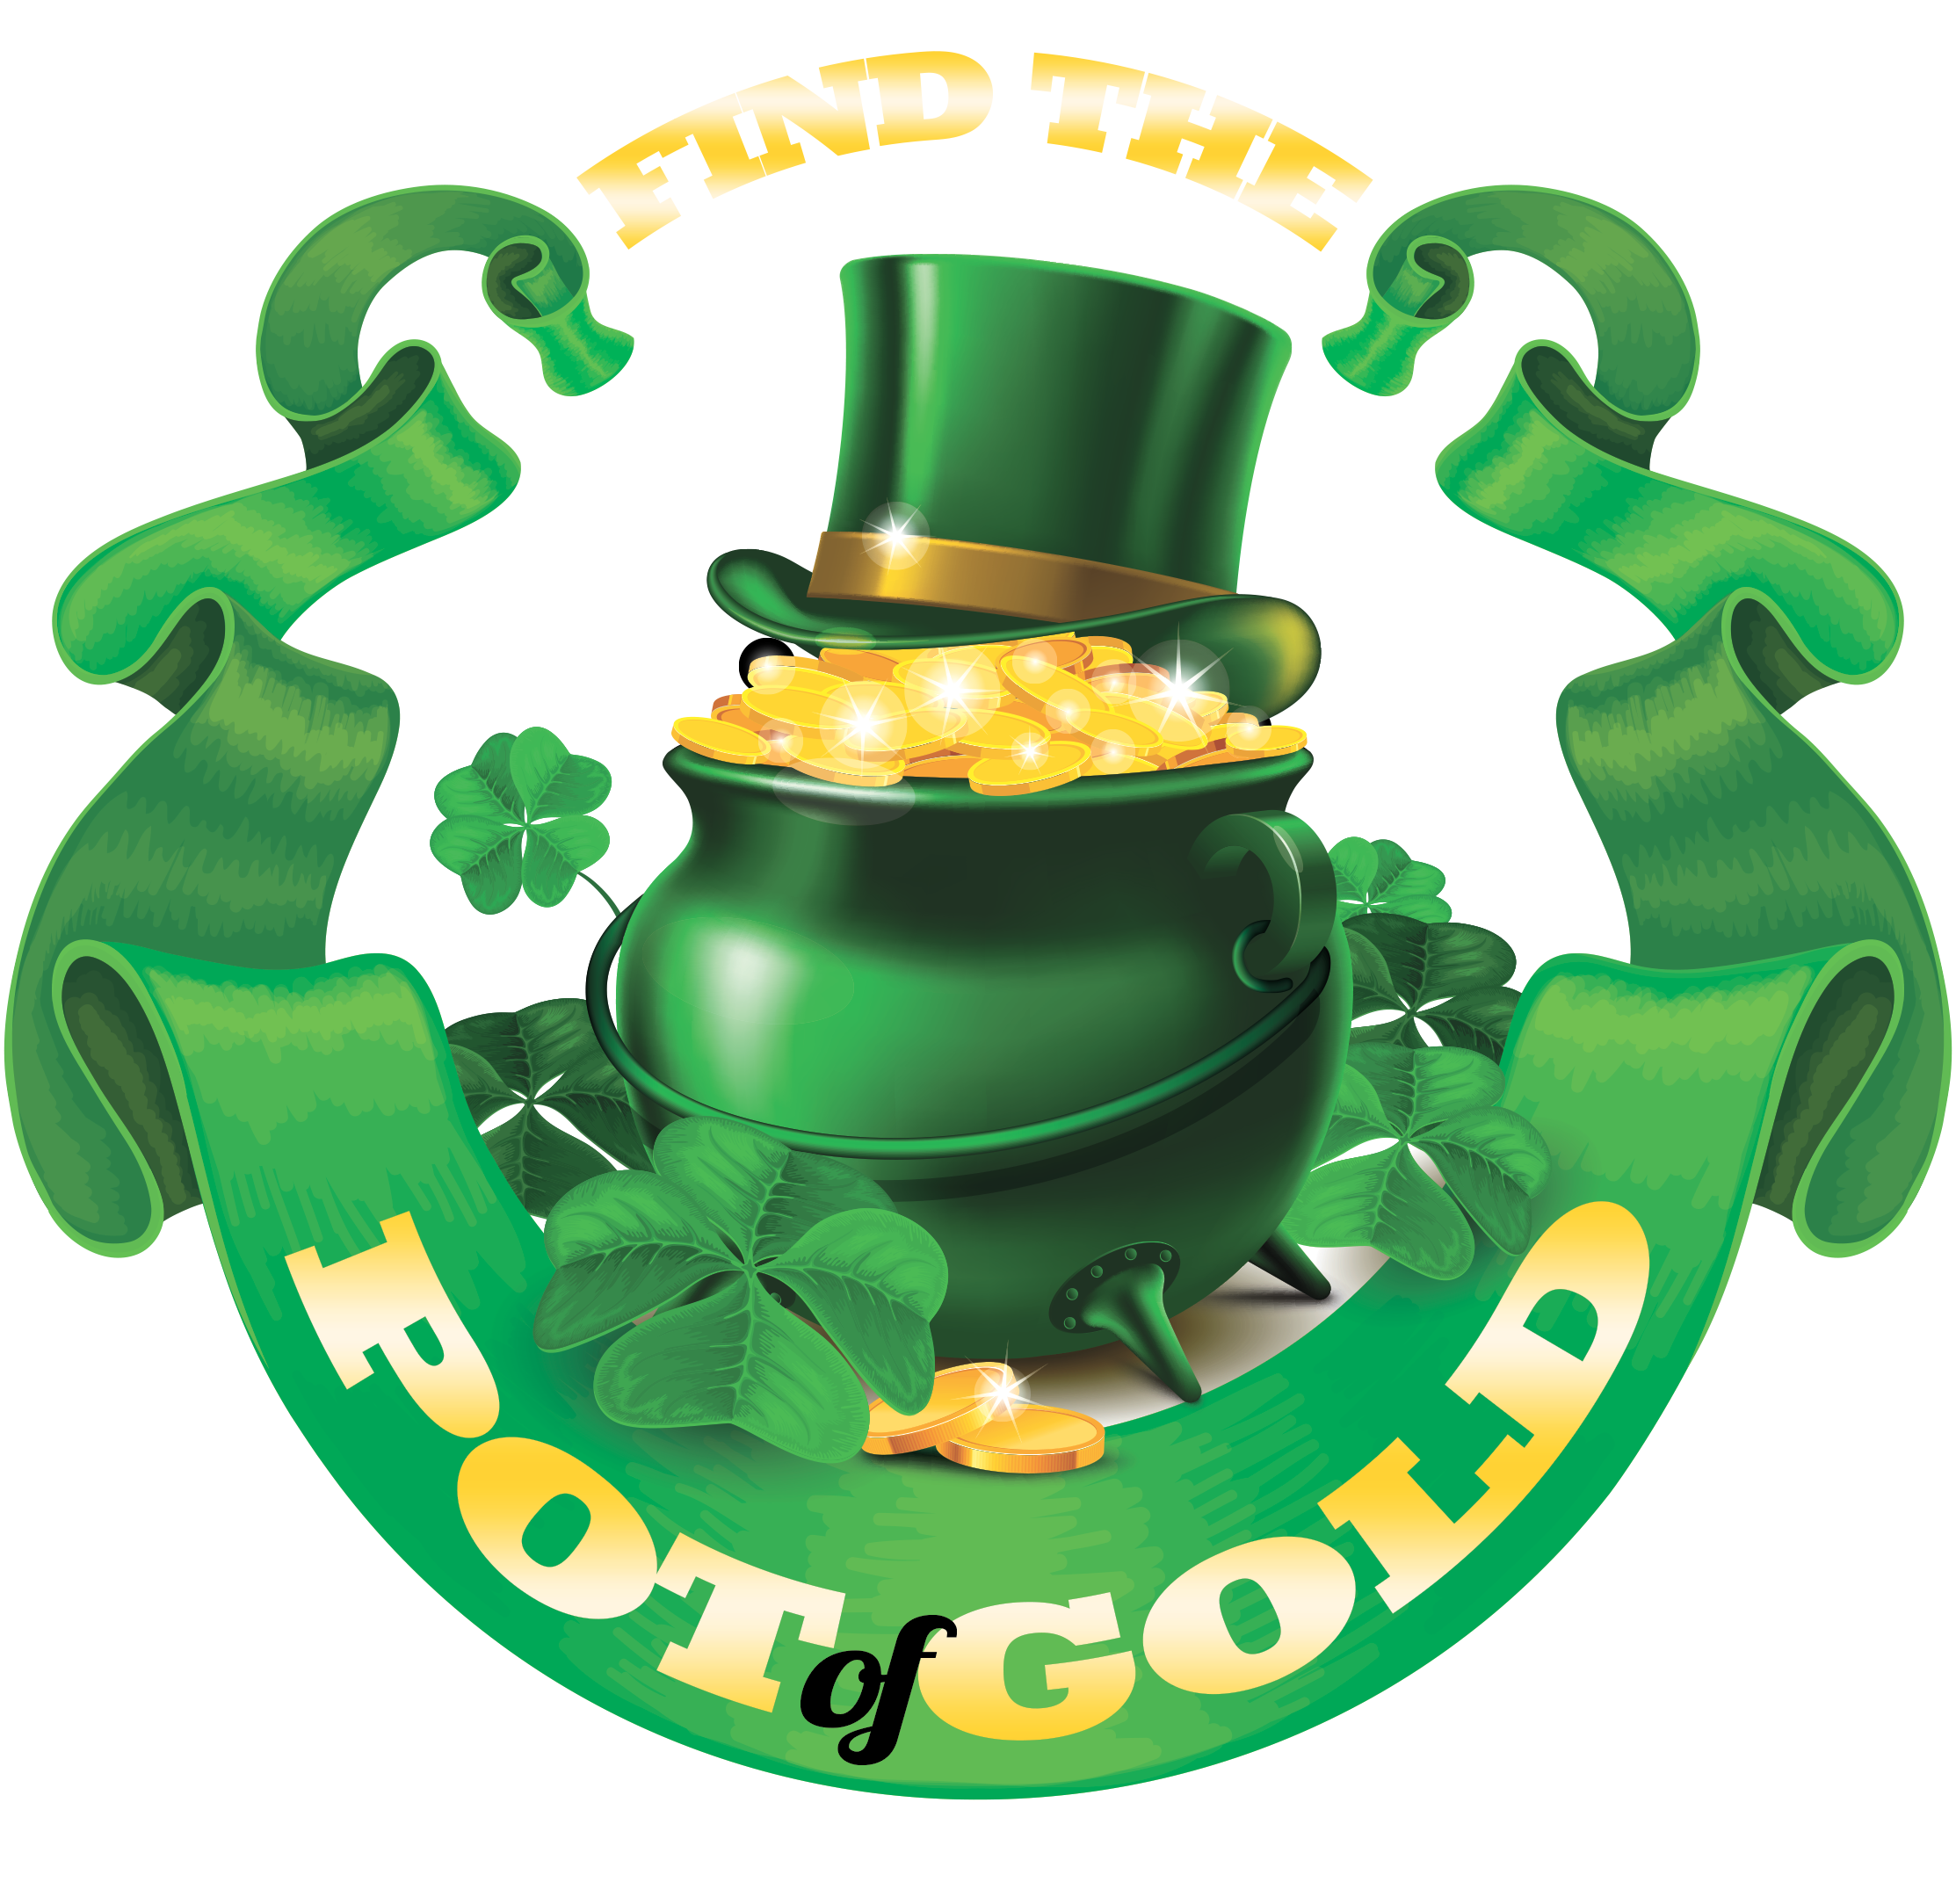 The pot of gold Lar Familiaris characters